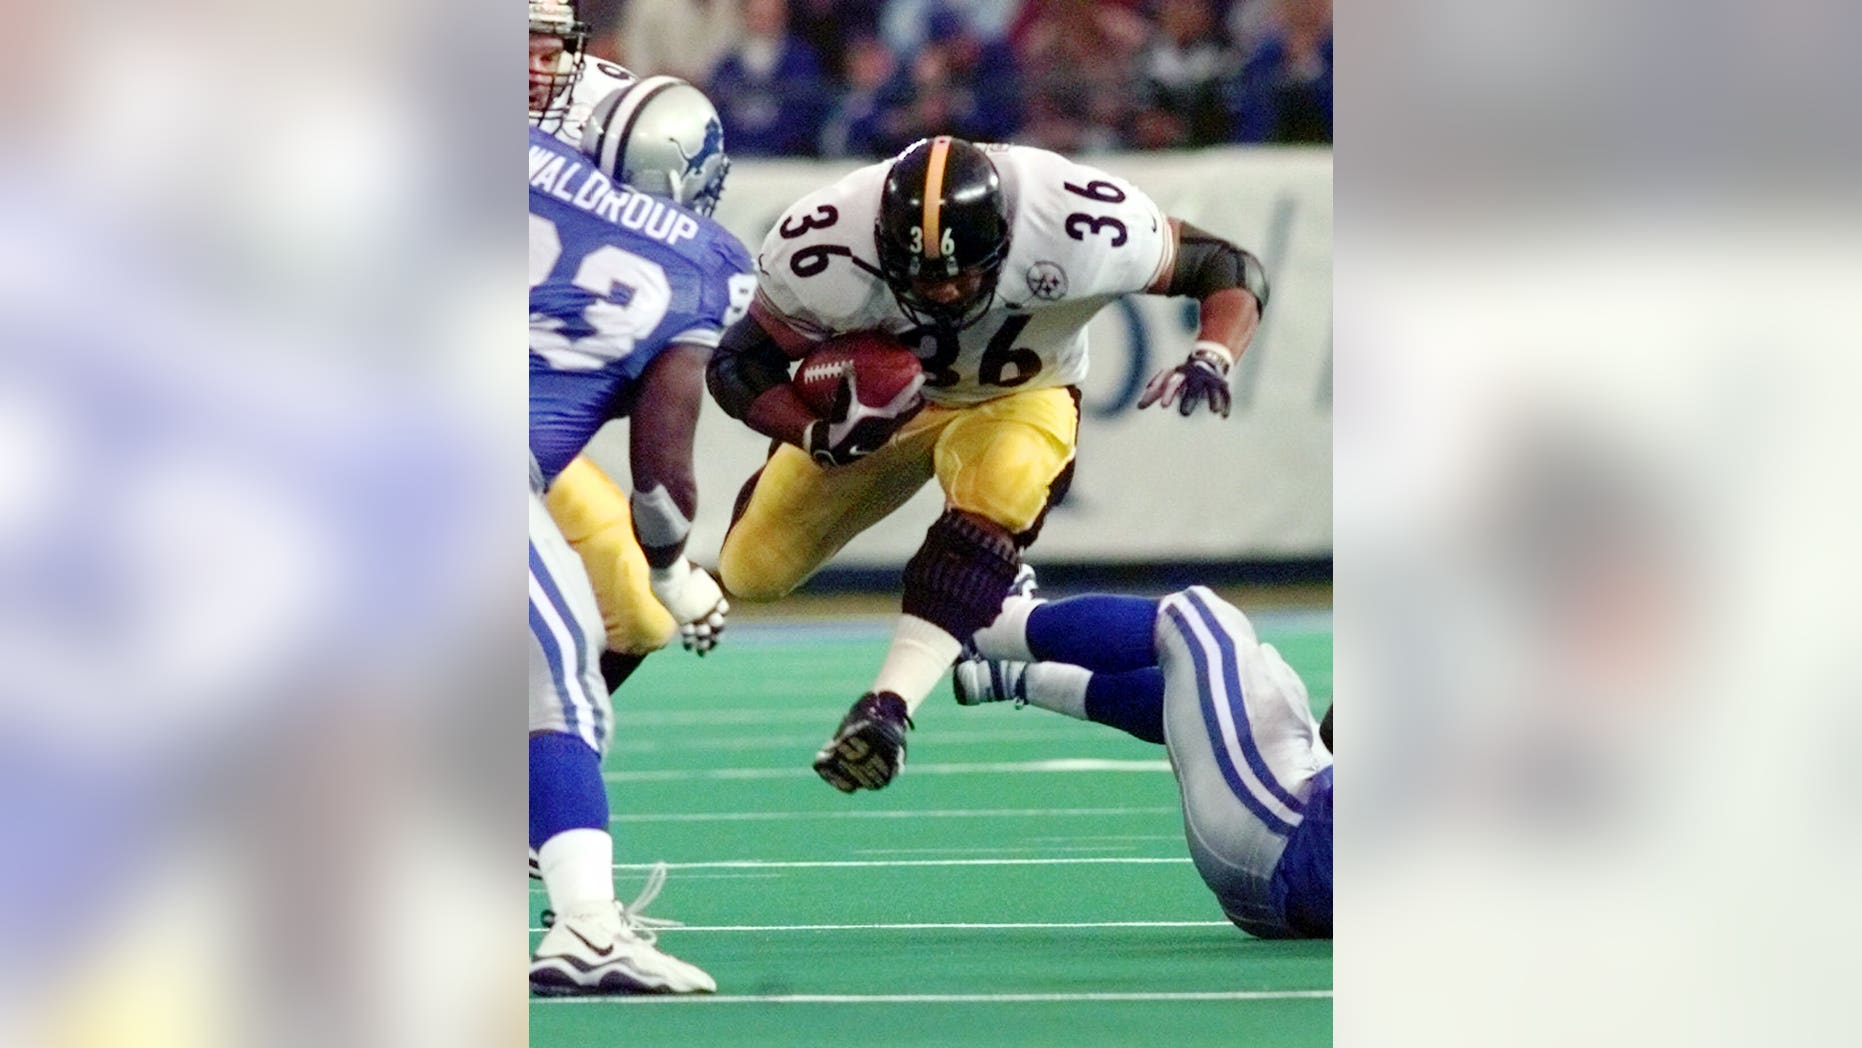 Pittsburgh Steelers running back Jerome Bettis breaks through a hole during the second quarter against the defense of the Detroit Lions in Pontiac, Mich., Thursday, Nov. 26, 1998. (AP Photo/Duane Burleson)